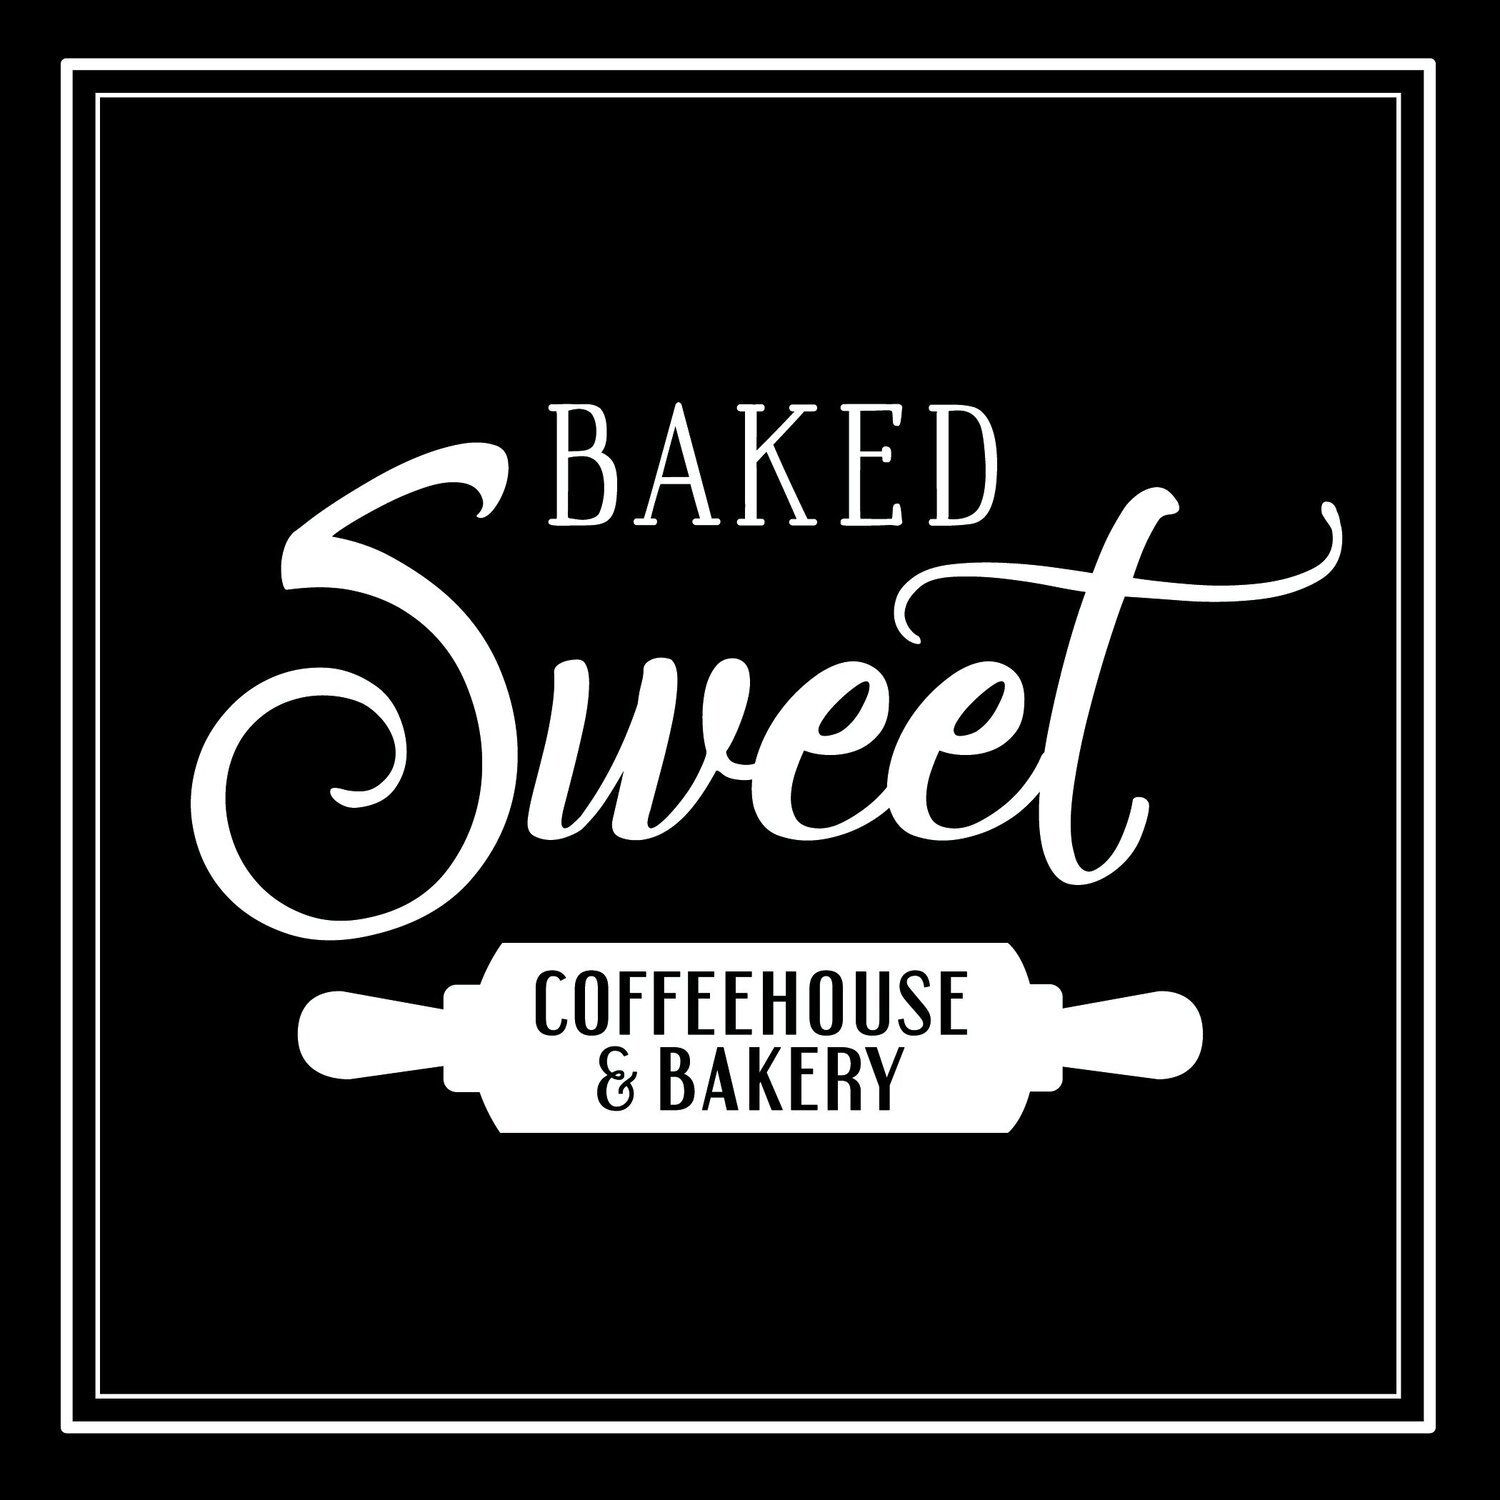 Baked Sweet Coffeehouse & Bakery in Myerstown, Pa